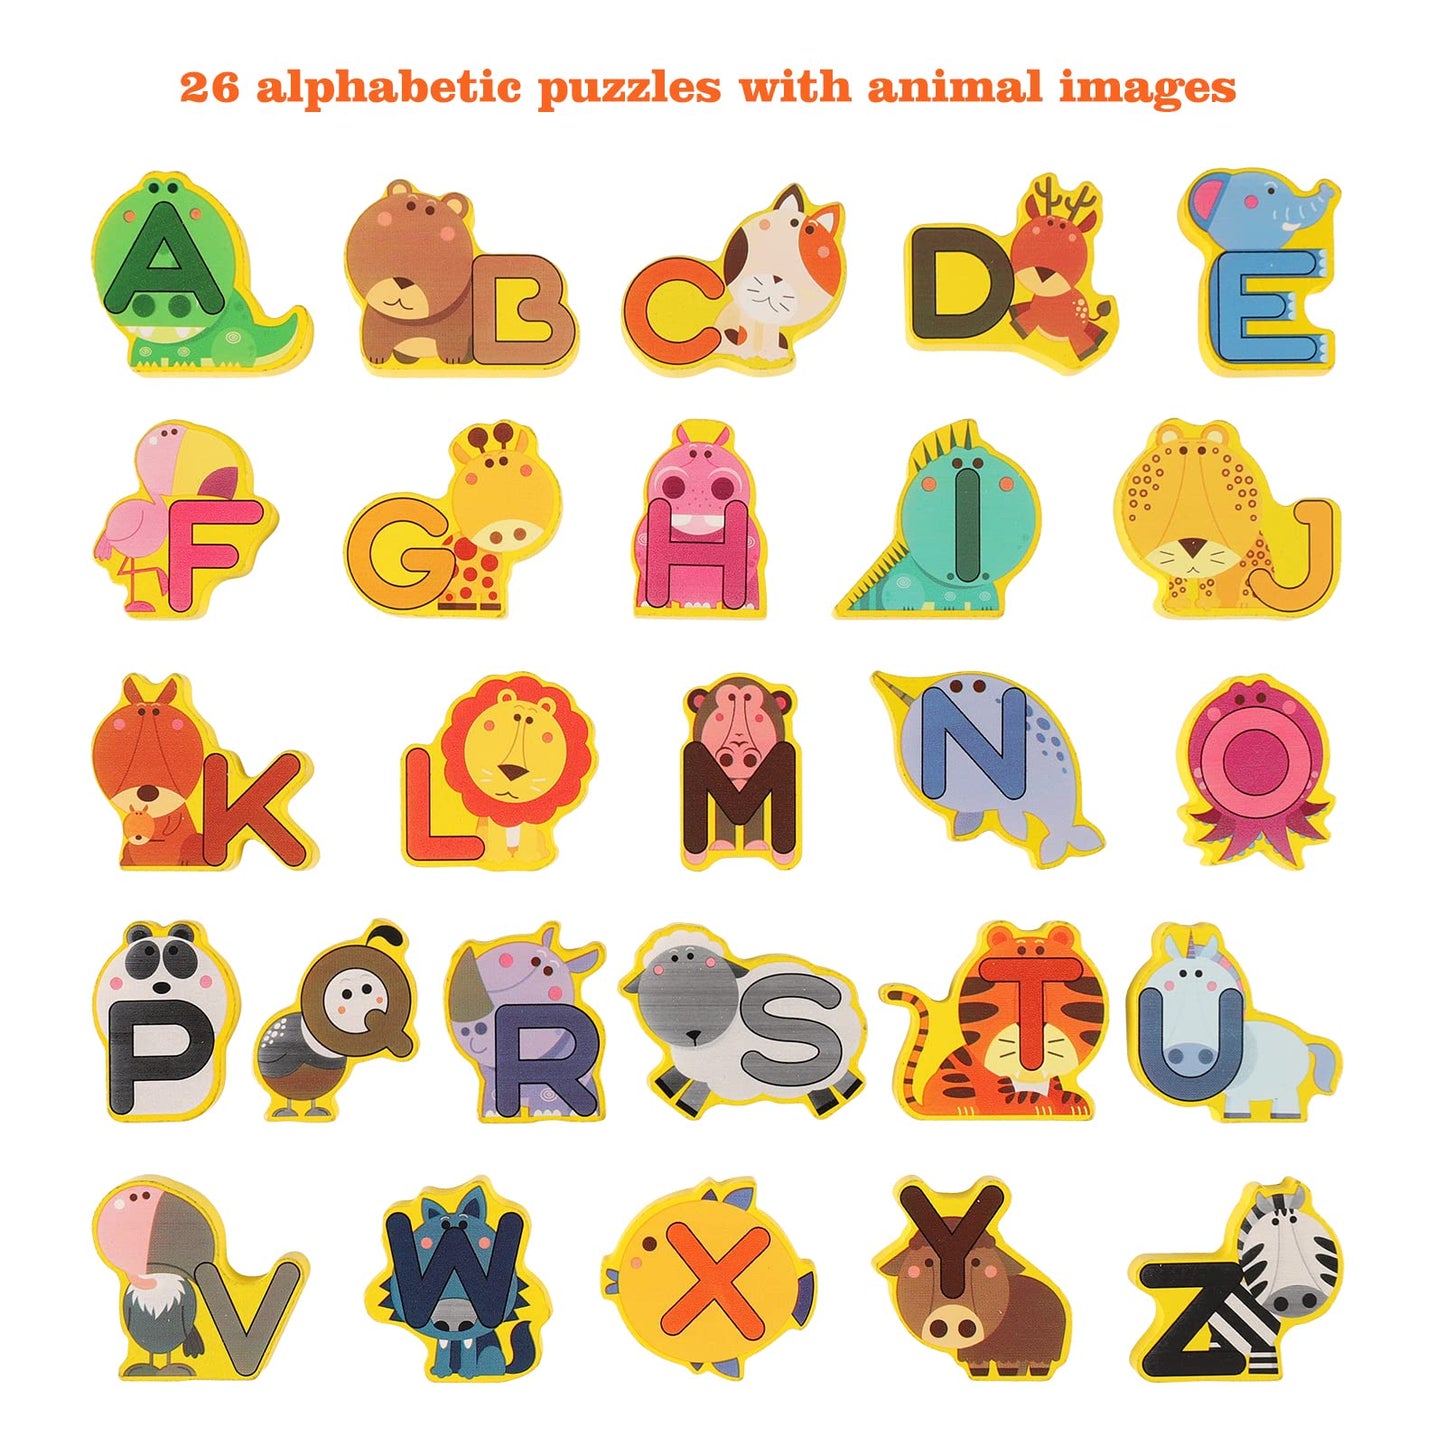 Wooden Peg Animal Alphabet Puzzle Game for Toddlers 2-6 Years Old, Alphabet Puzzles with Animal Shapes and Letters for Boys and Girls, Educational Alphabet Learning Gift Toys for Kids Ages 2 3 4 5 6